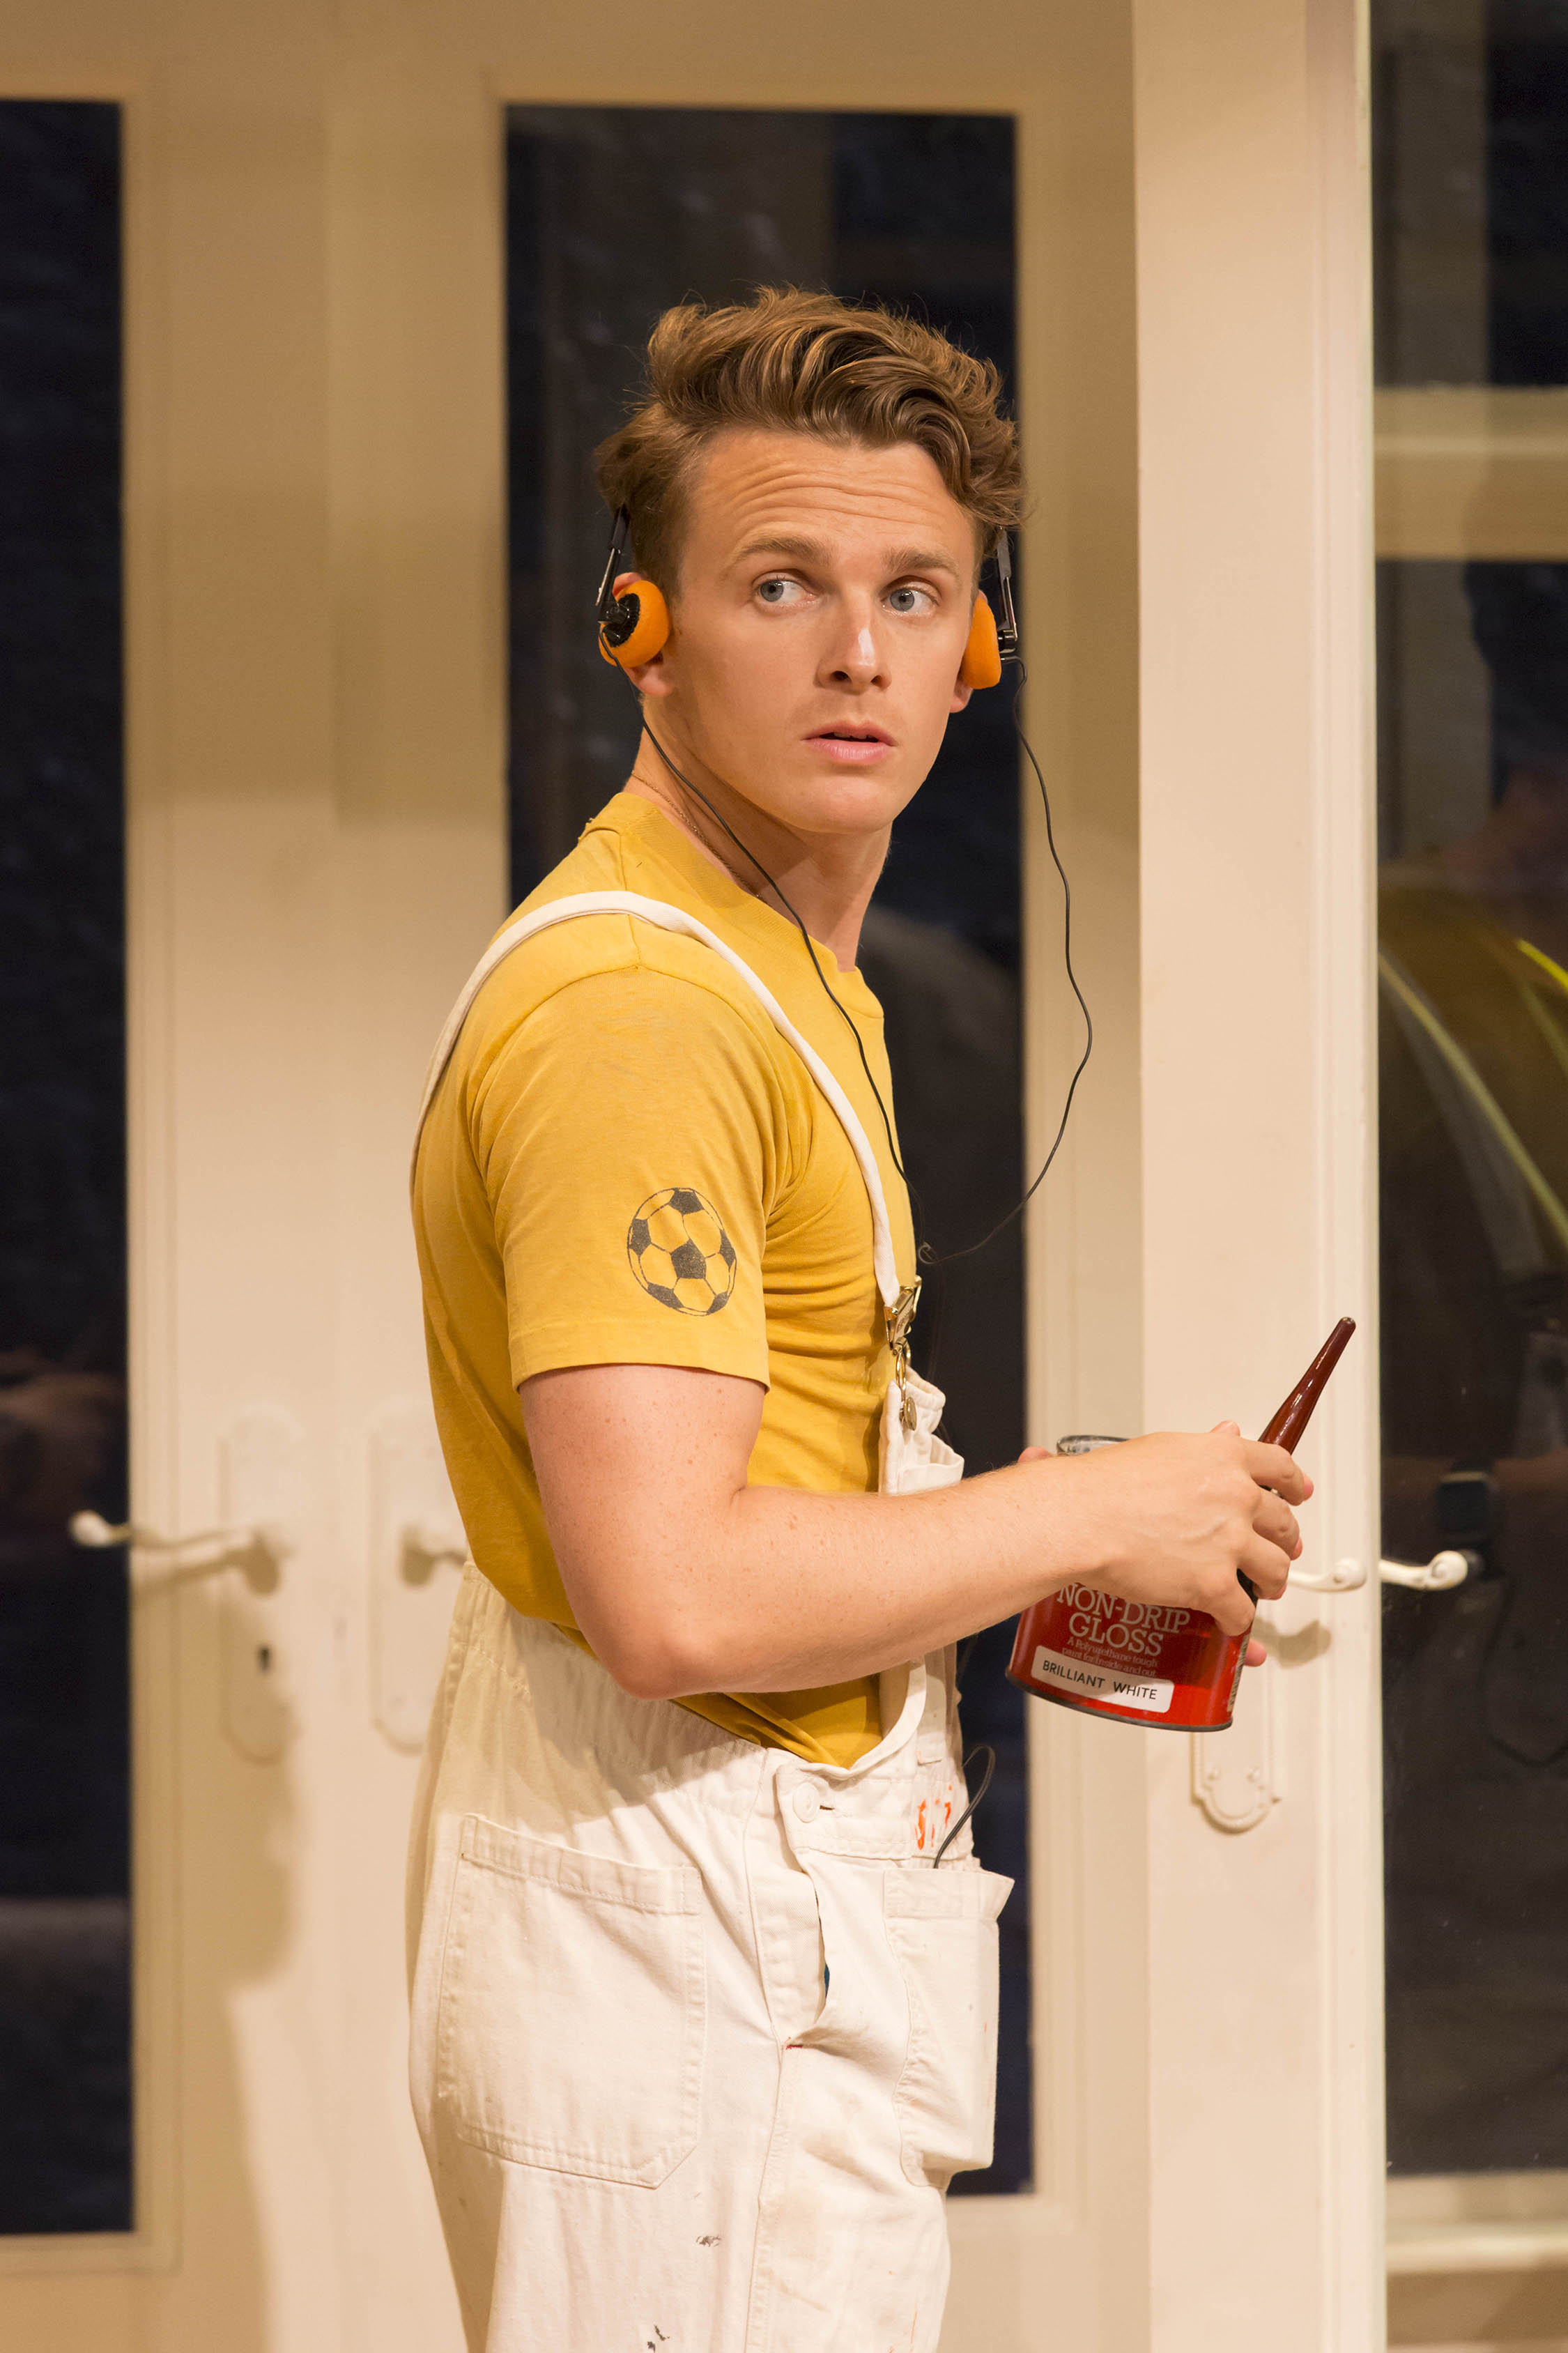 Lewis Reeves in 'My night With Reg'